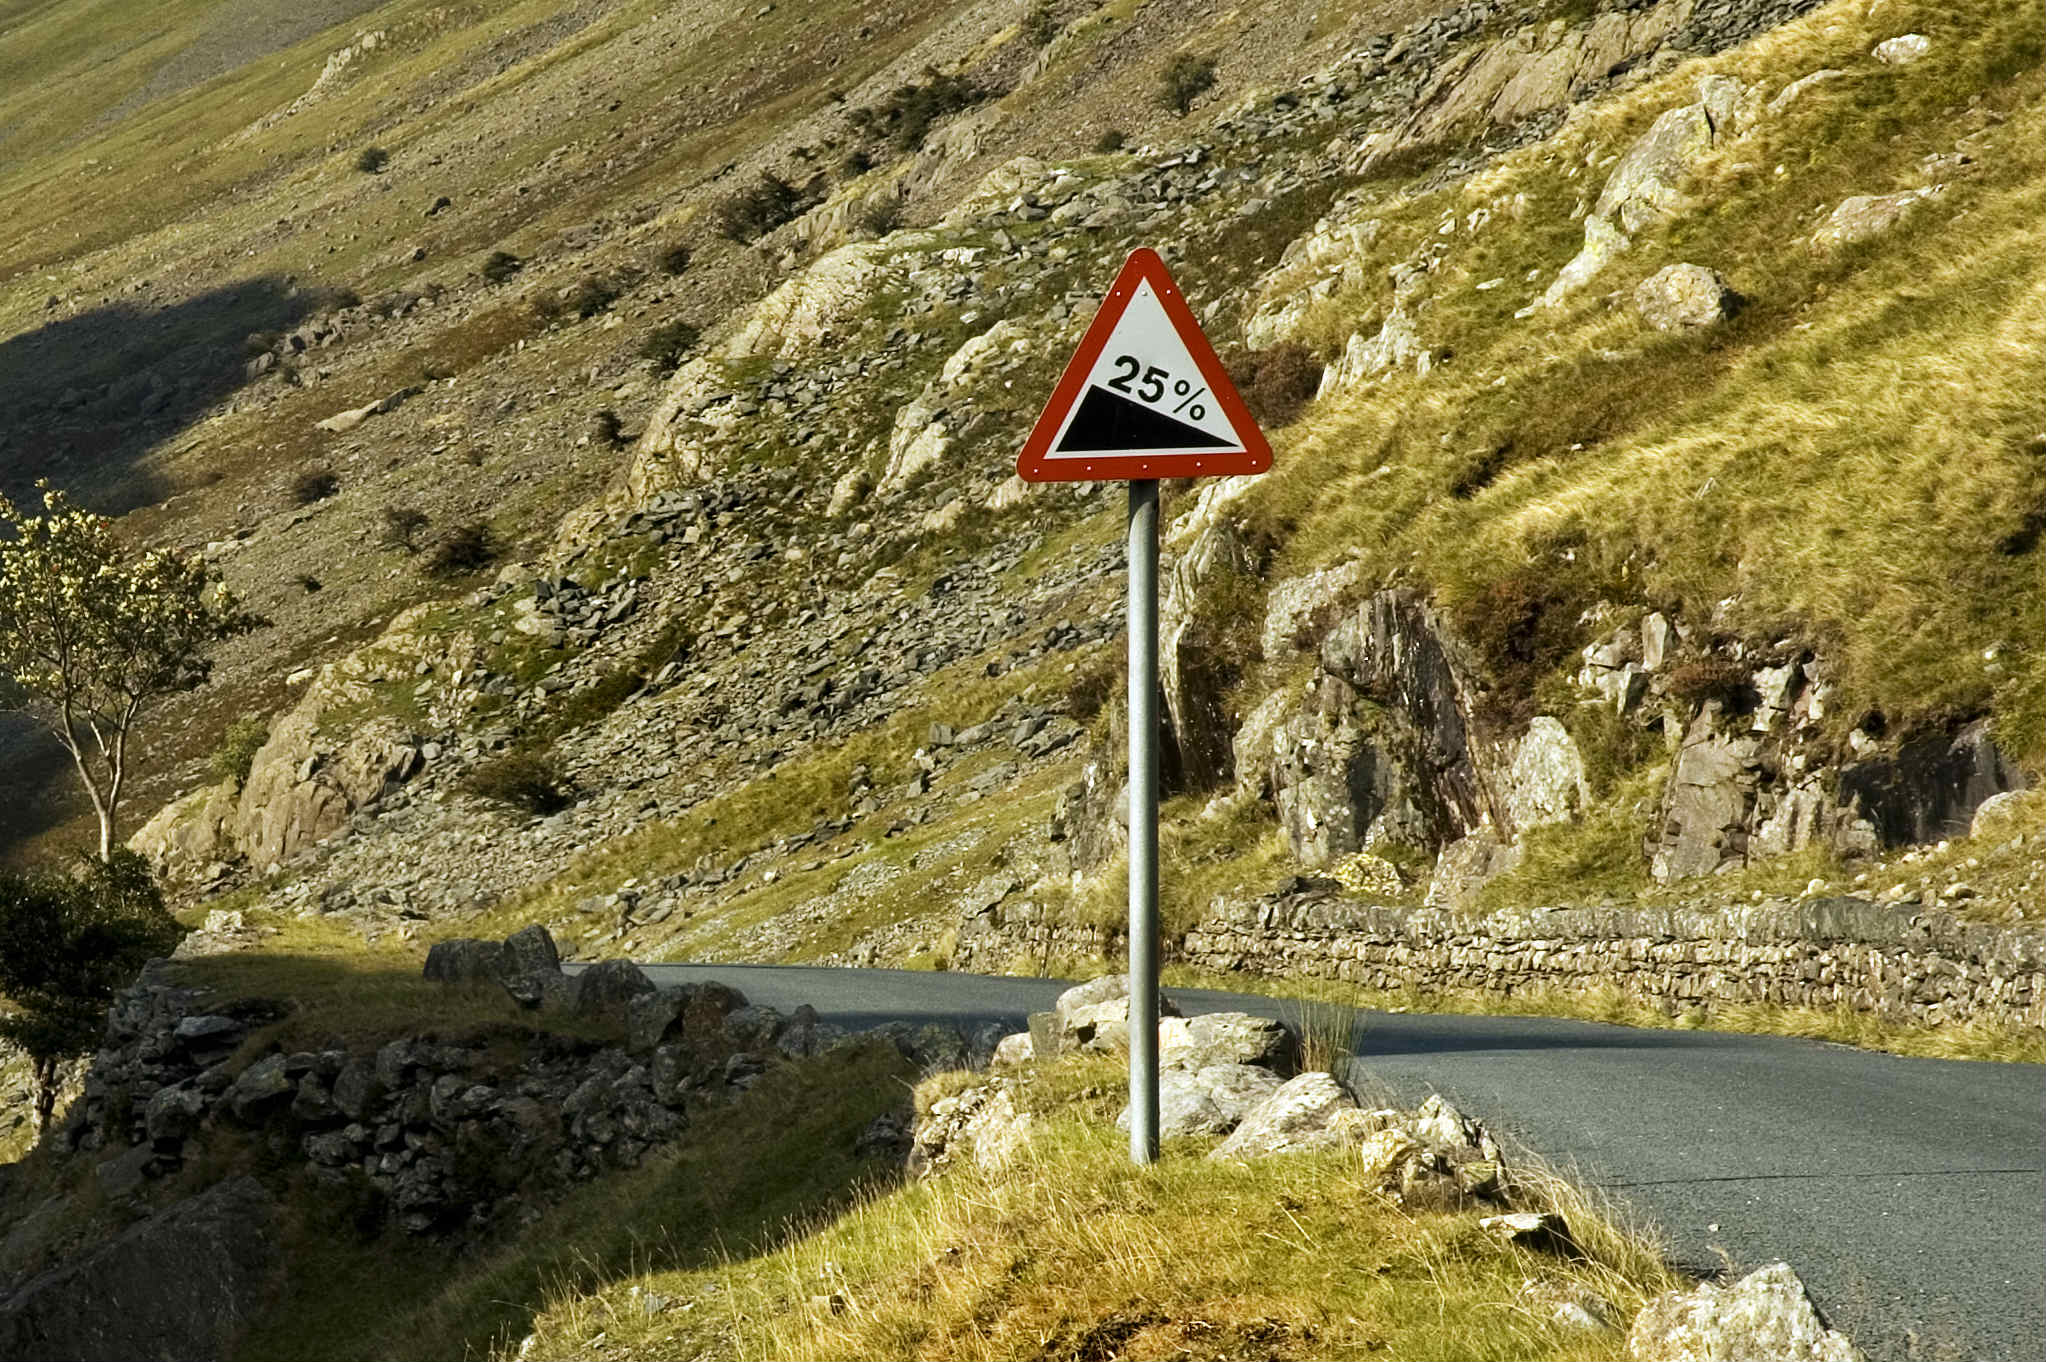 When you see this sign for a steep hill how should you descend?